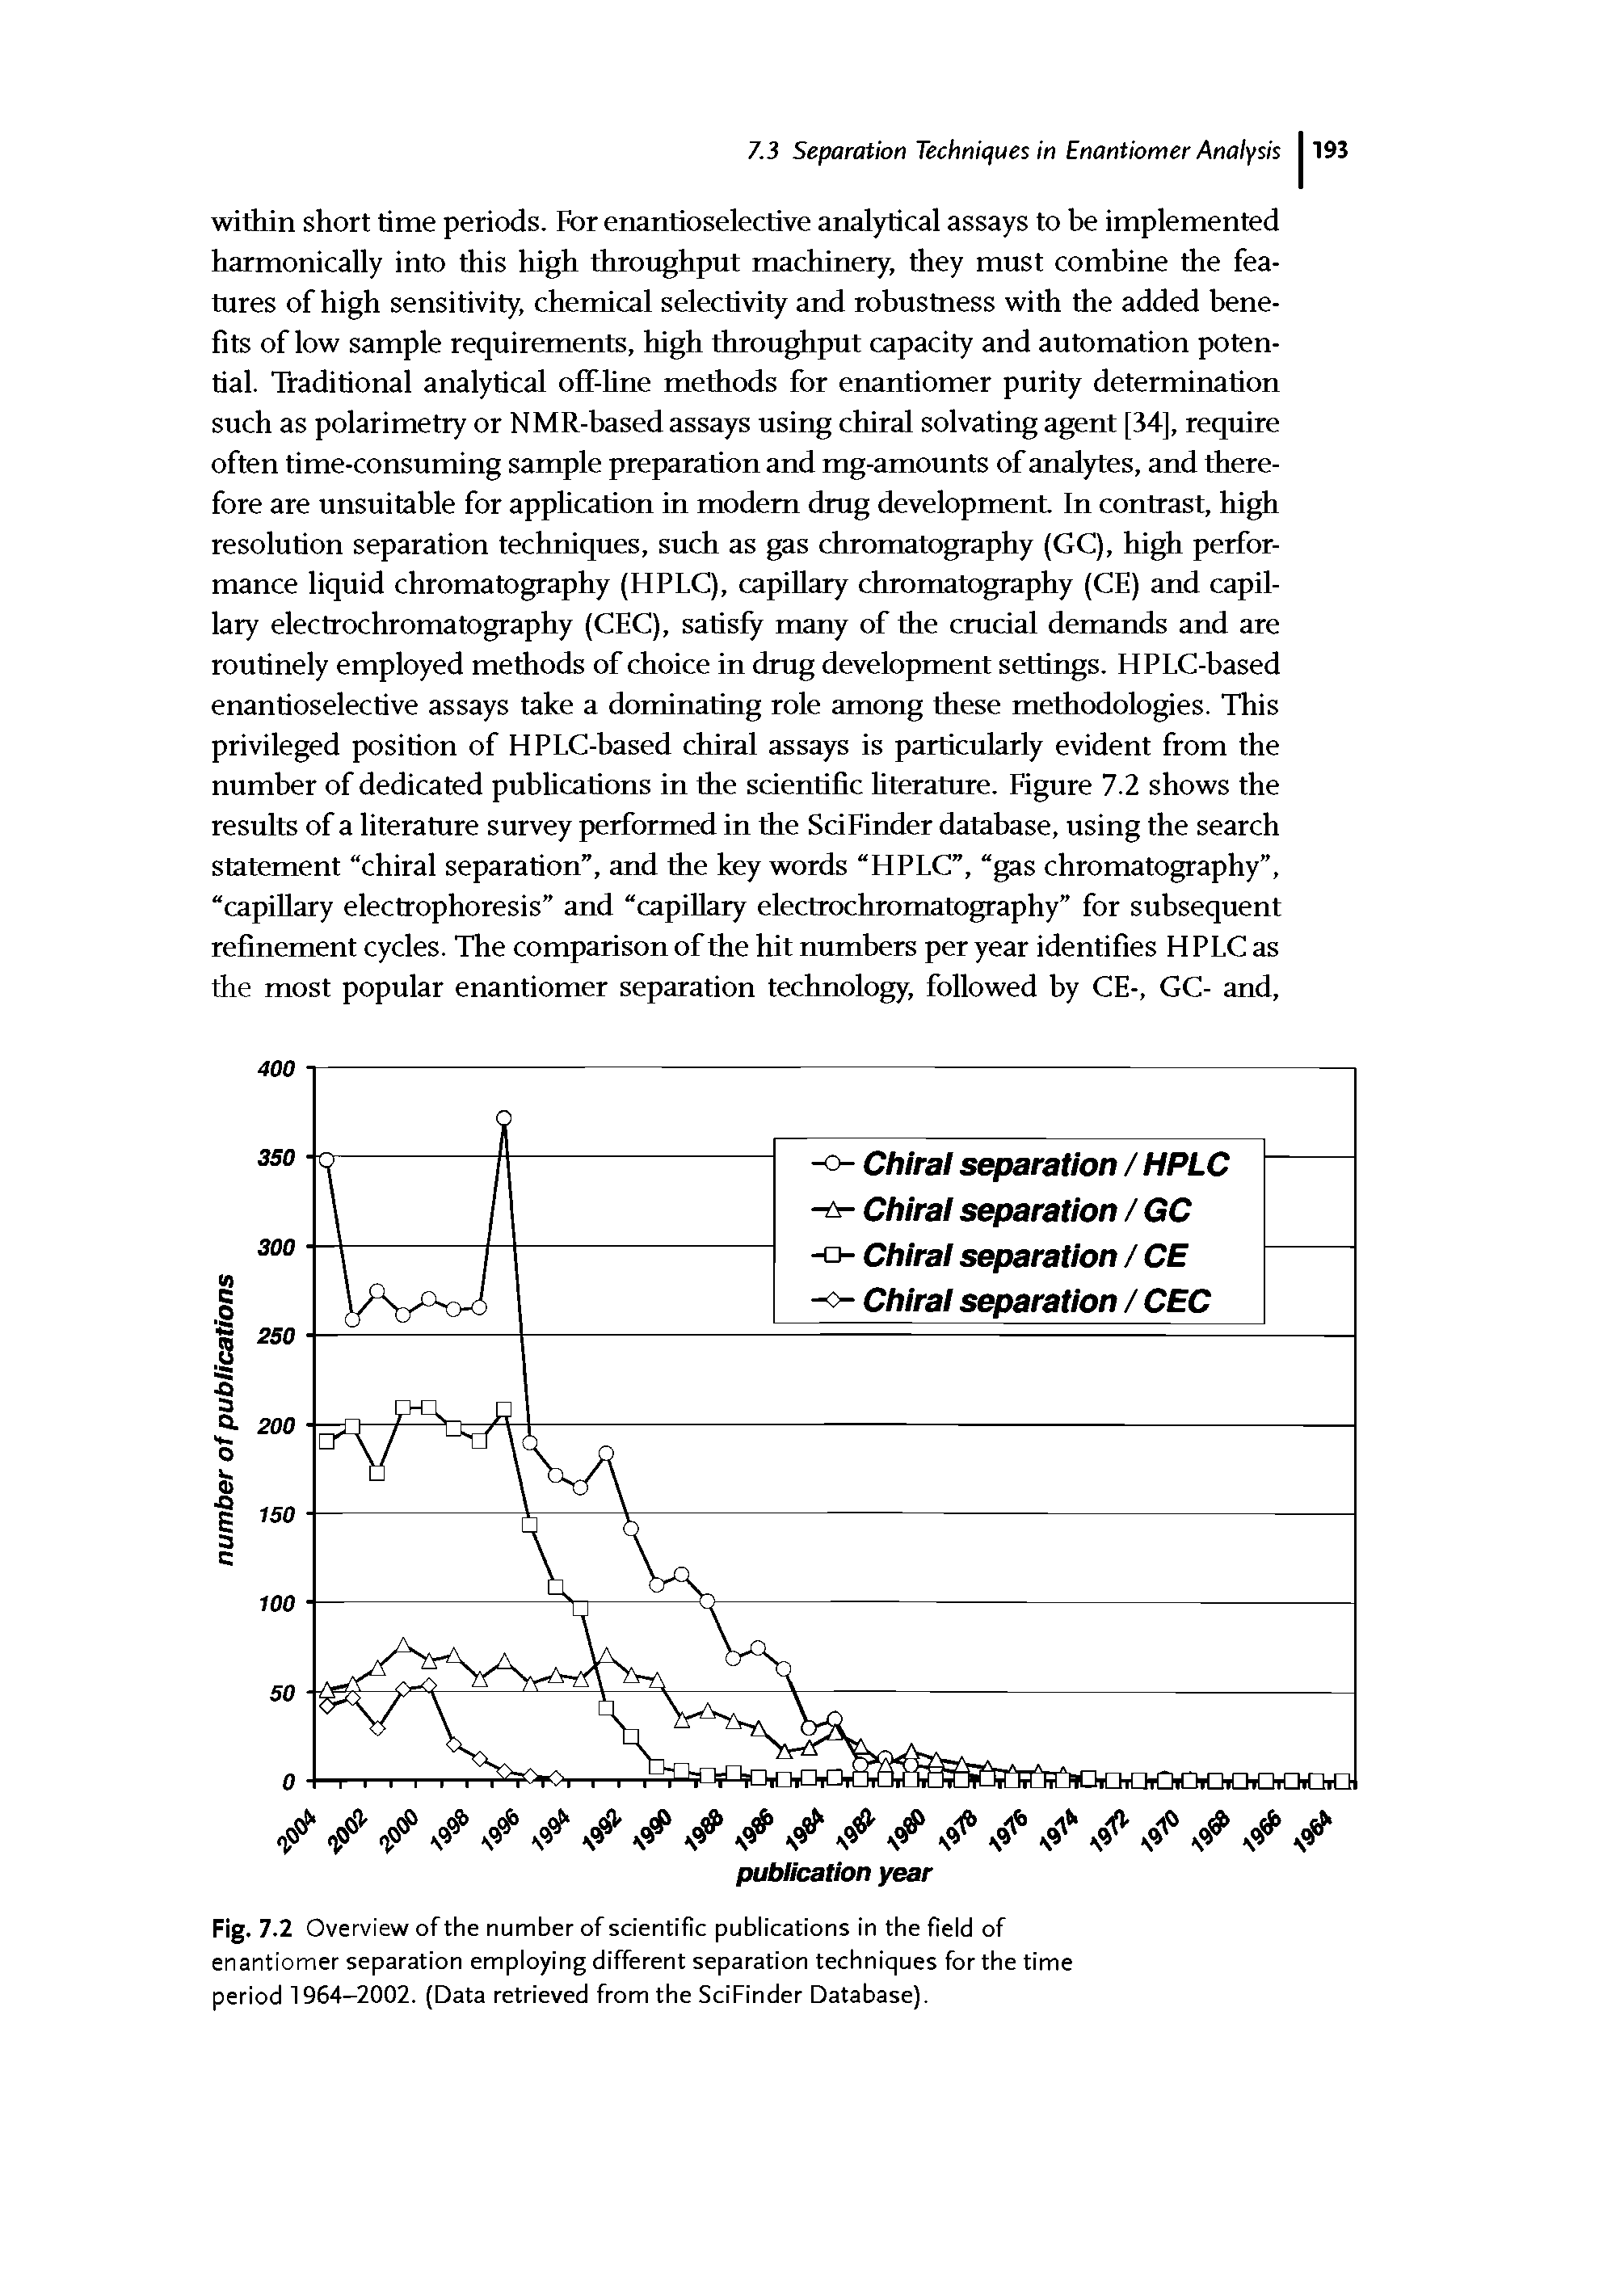 Fig. 7.2 Overview of the number of scientific publications in the field of enantiomer separation employing different separation techniques for the time period 1964—2002. (Data retrieved from the SciFinder Database).